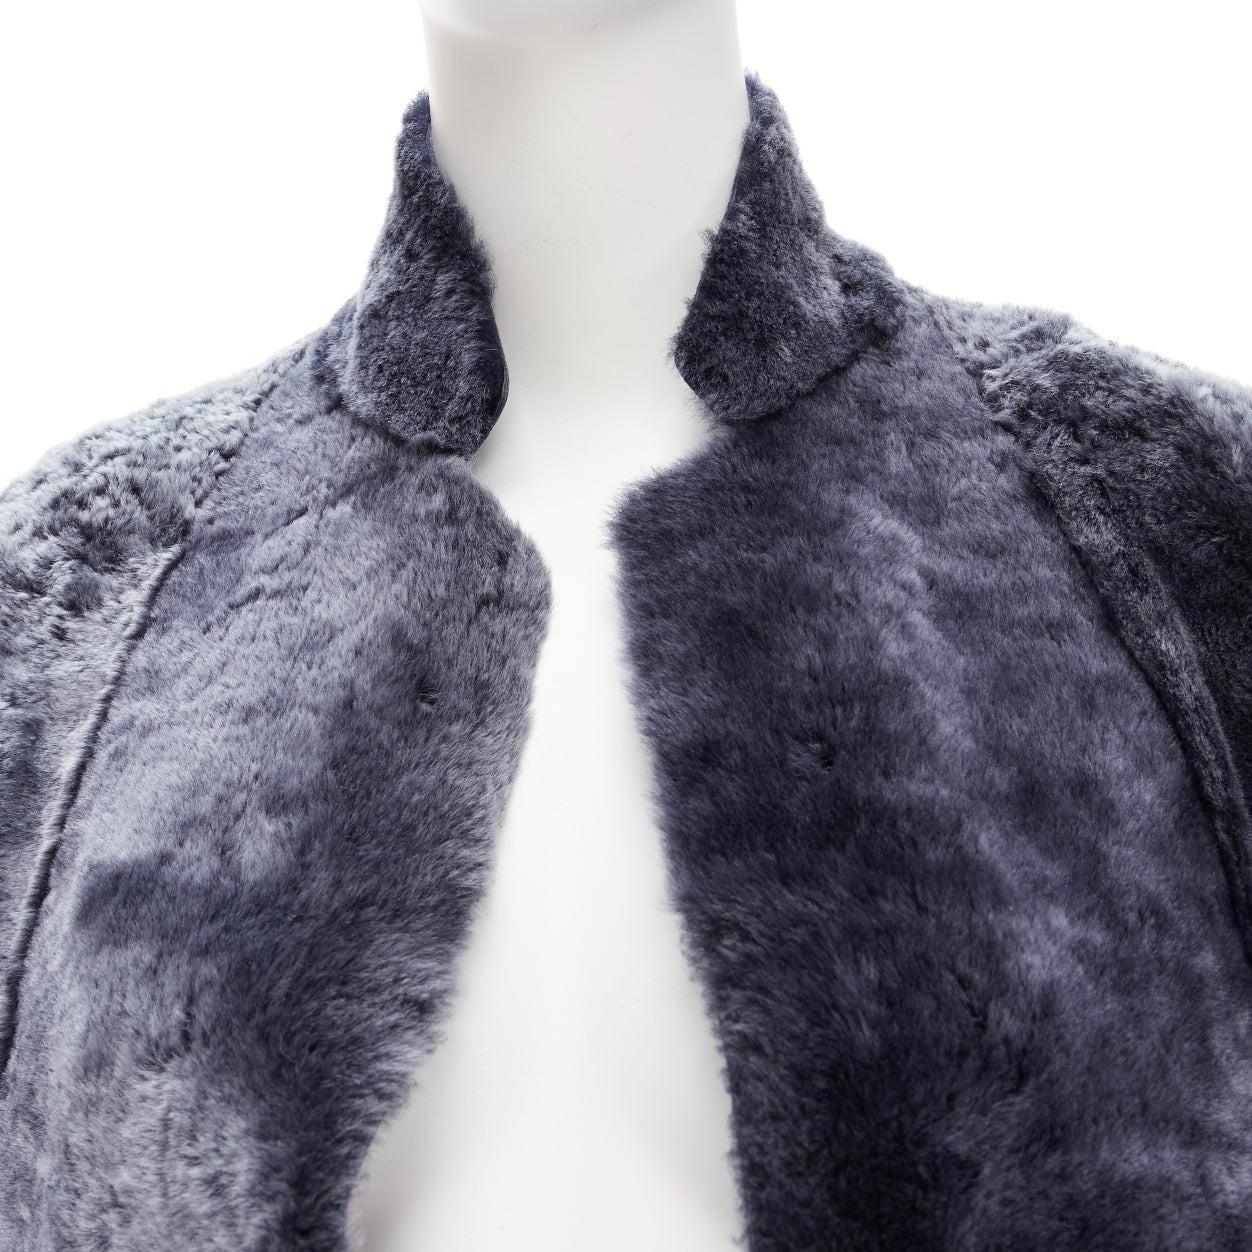 OLD CELINE Phoebe Philo grey lamb fur minimal cocoon coat FR34 XS
Reference: TGAS/D00869
Brand: Celine
Designer: Phoebe Philo
Material: Lambskin Leather
Color: Navy
Pattern: Solid
Lining: Navy Leather
Made in: Italy

CONDITION:
Condition: Excellent,